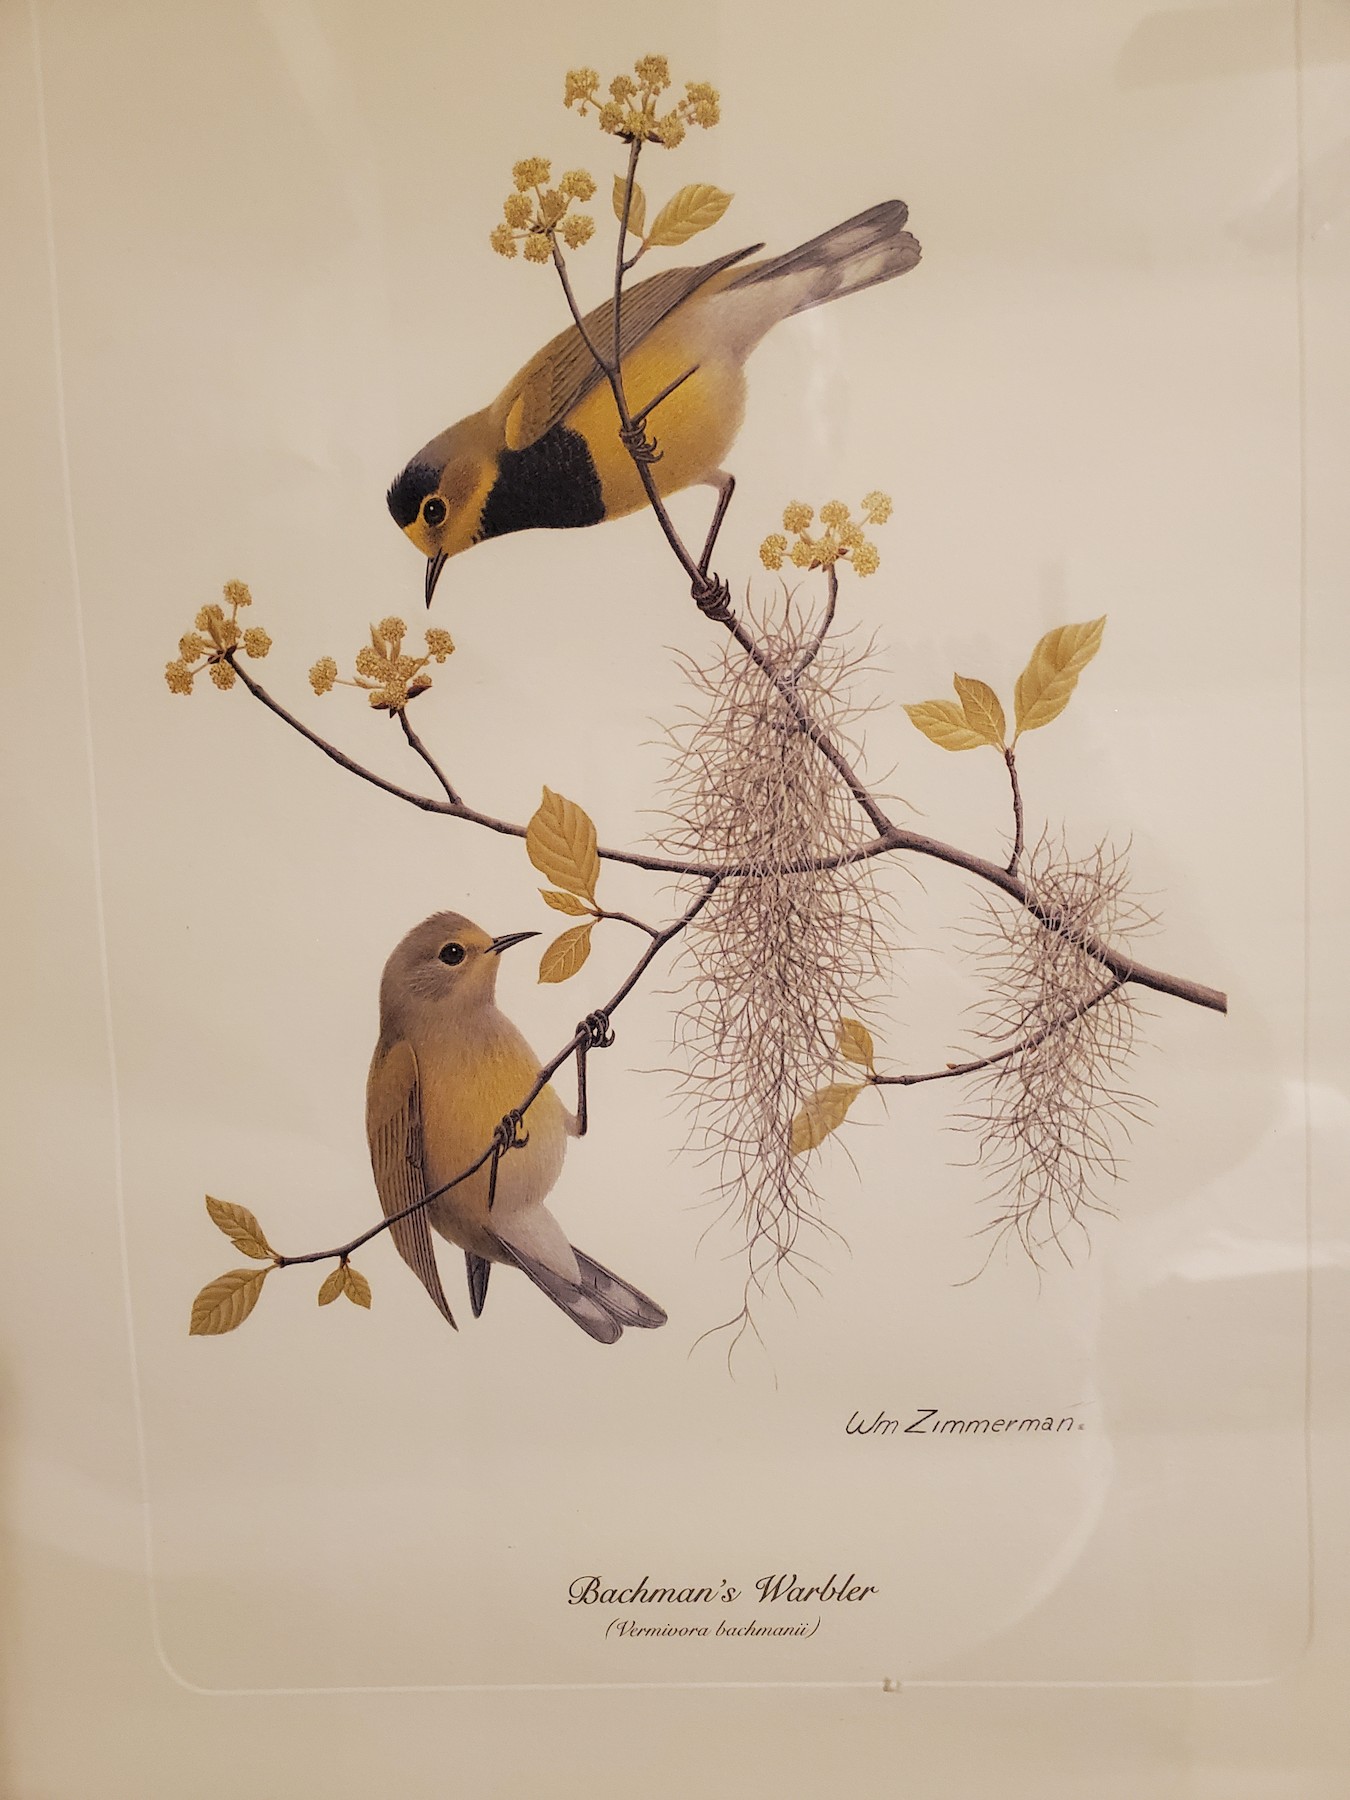 Bachman's Warbler - AL Reports from Other Birders